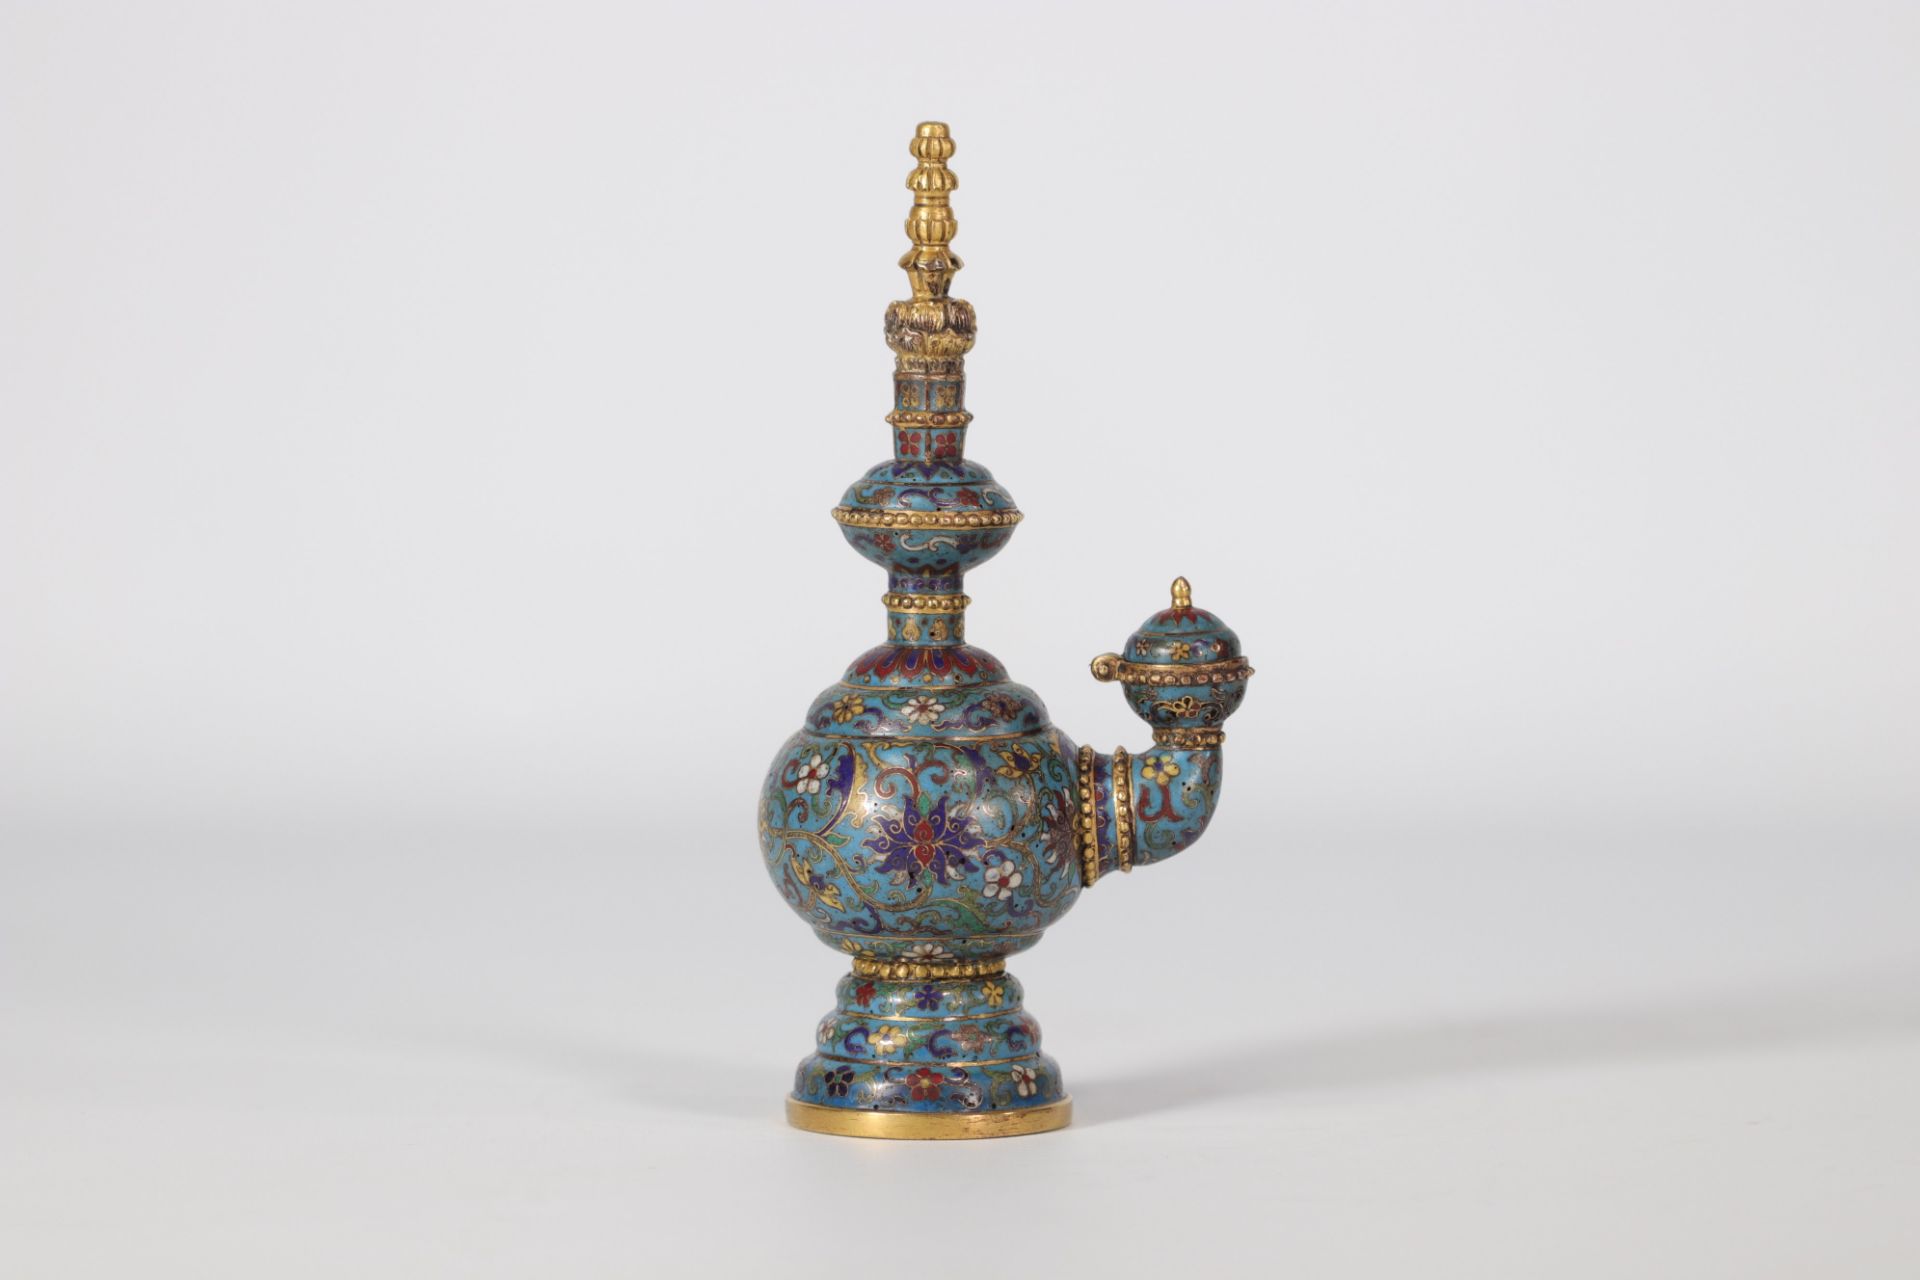 Cloisonne vase with lotus design on a blue background with Qianlong mark from 18th century - Image 4 of 5